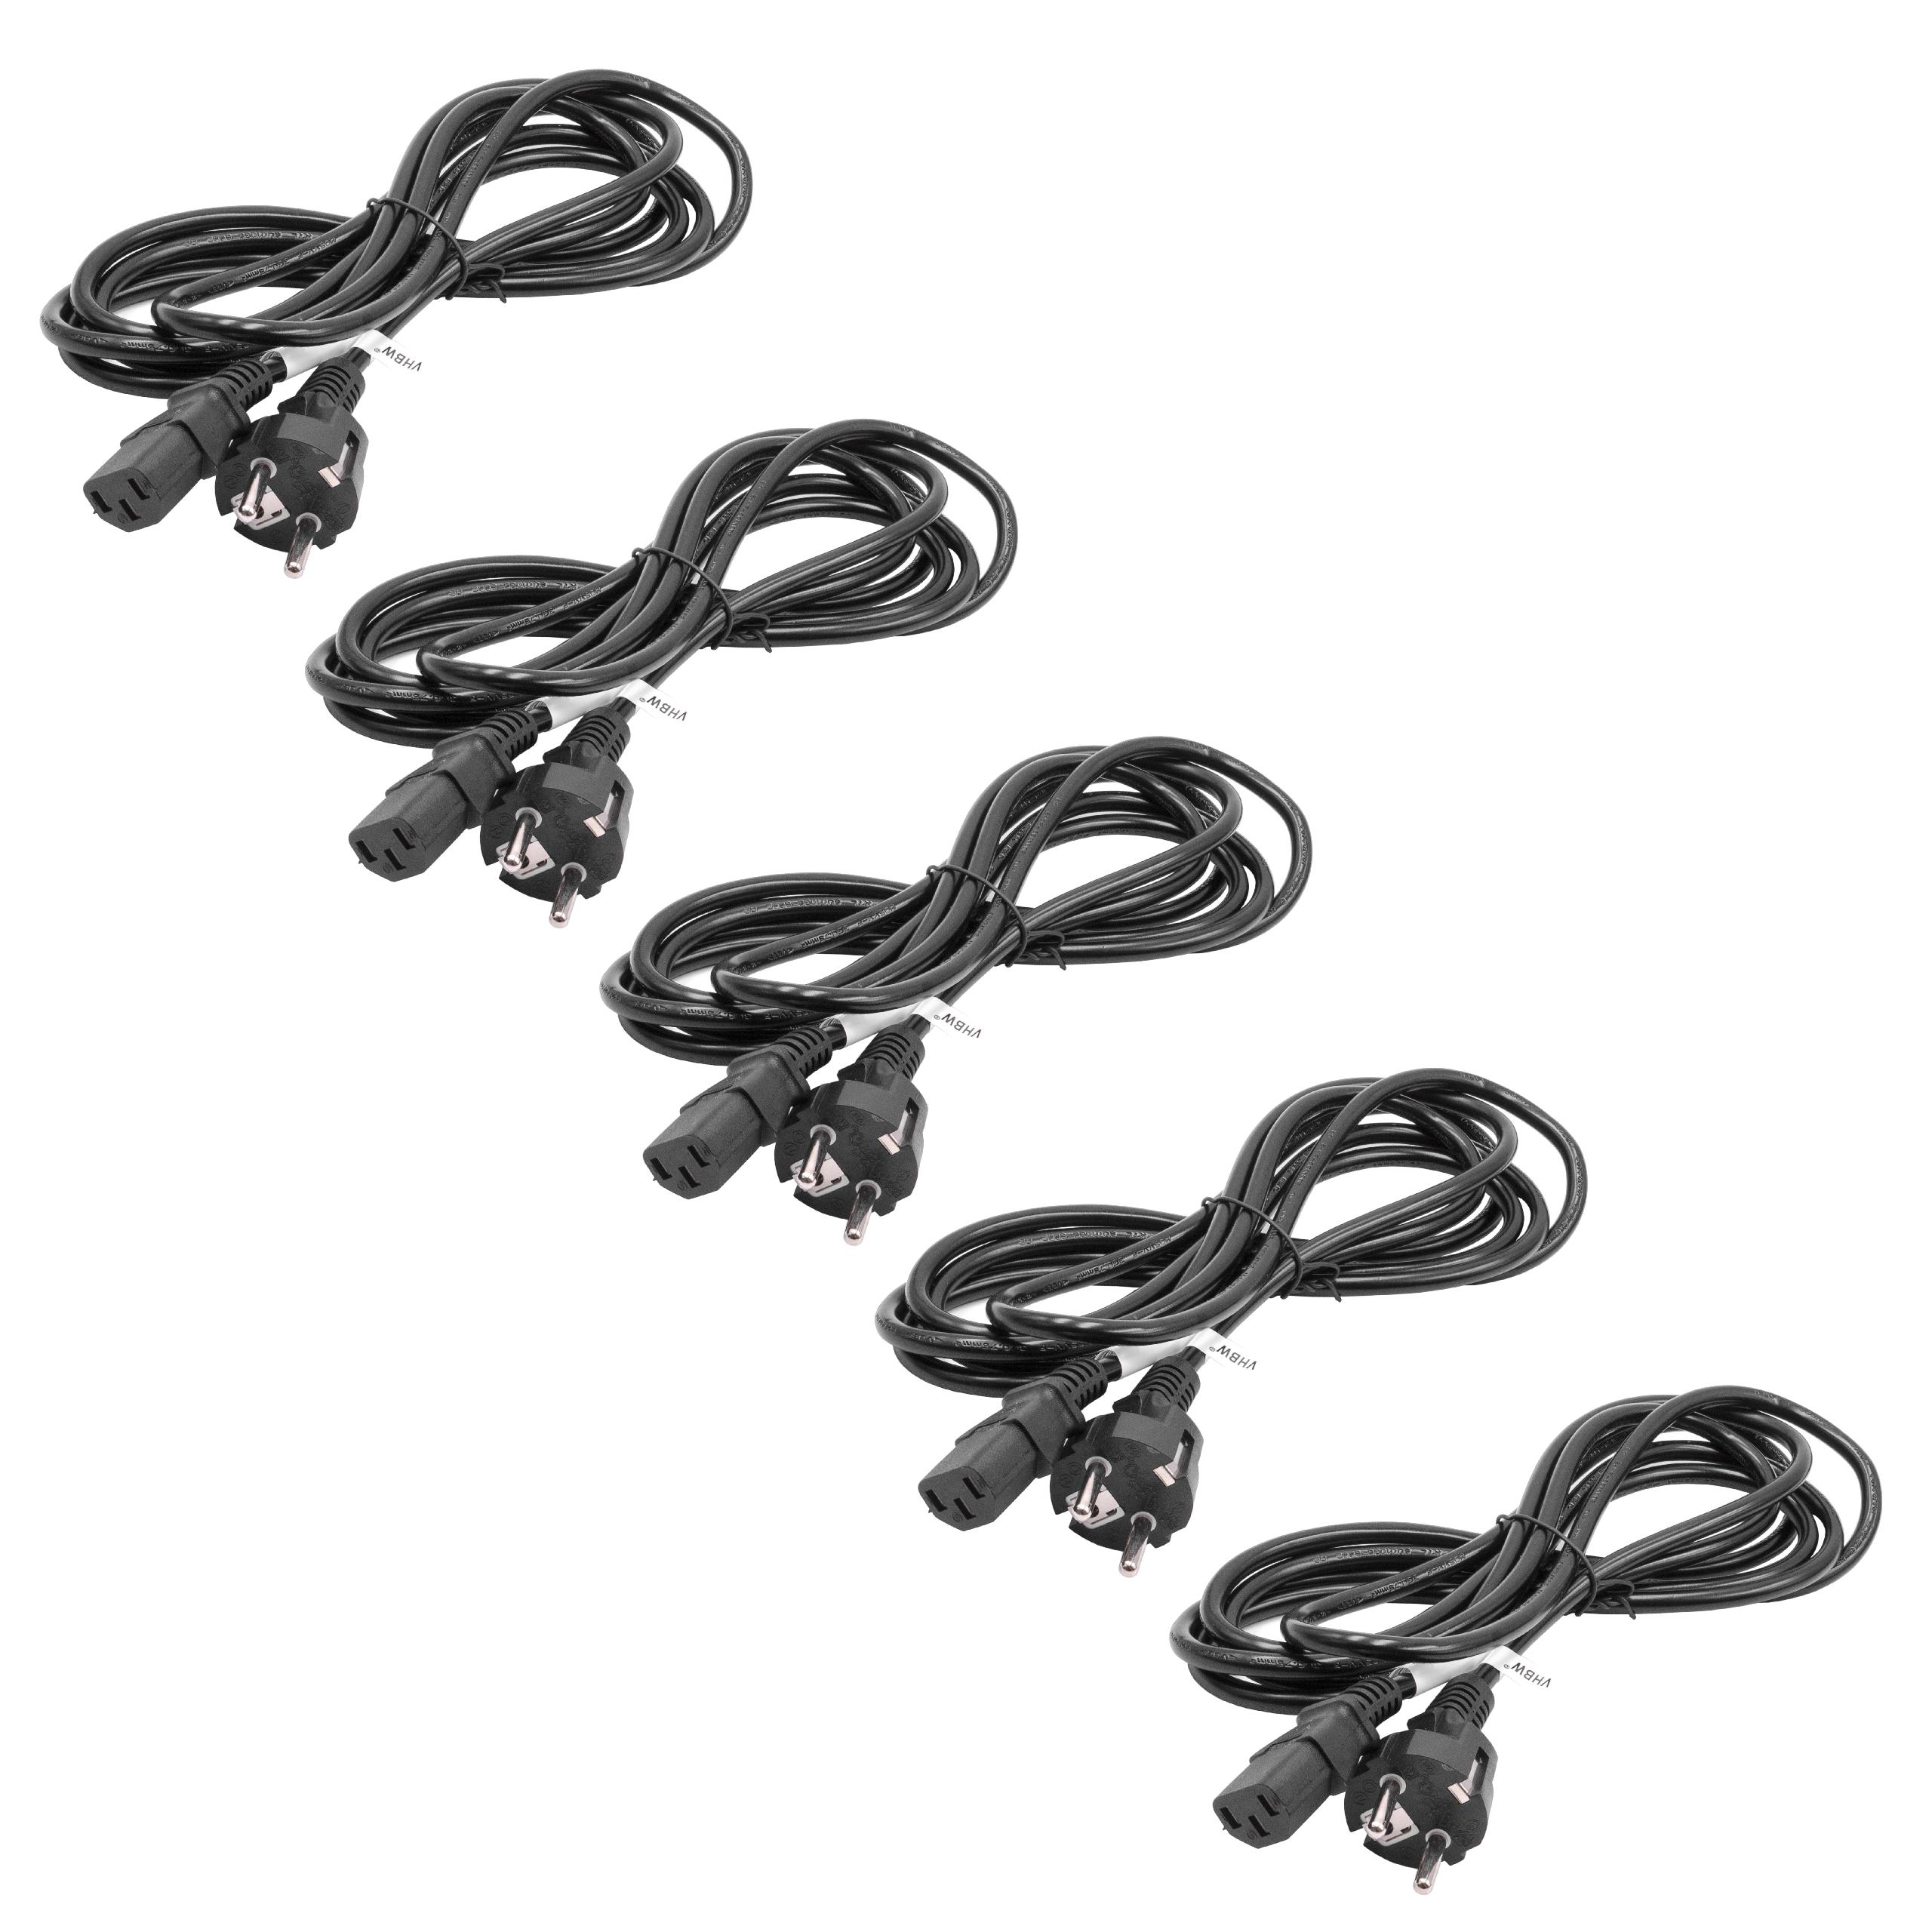 5x C13 Power Cable Euro Plug suitable for Devices e.g. PC Monitor Computer - 3 m